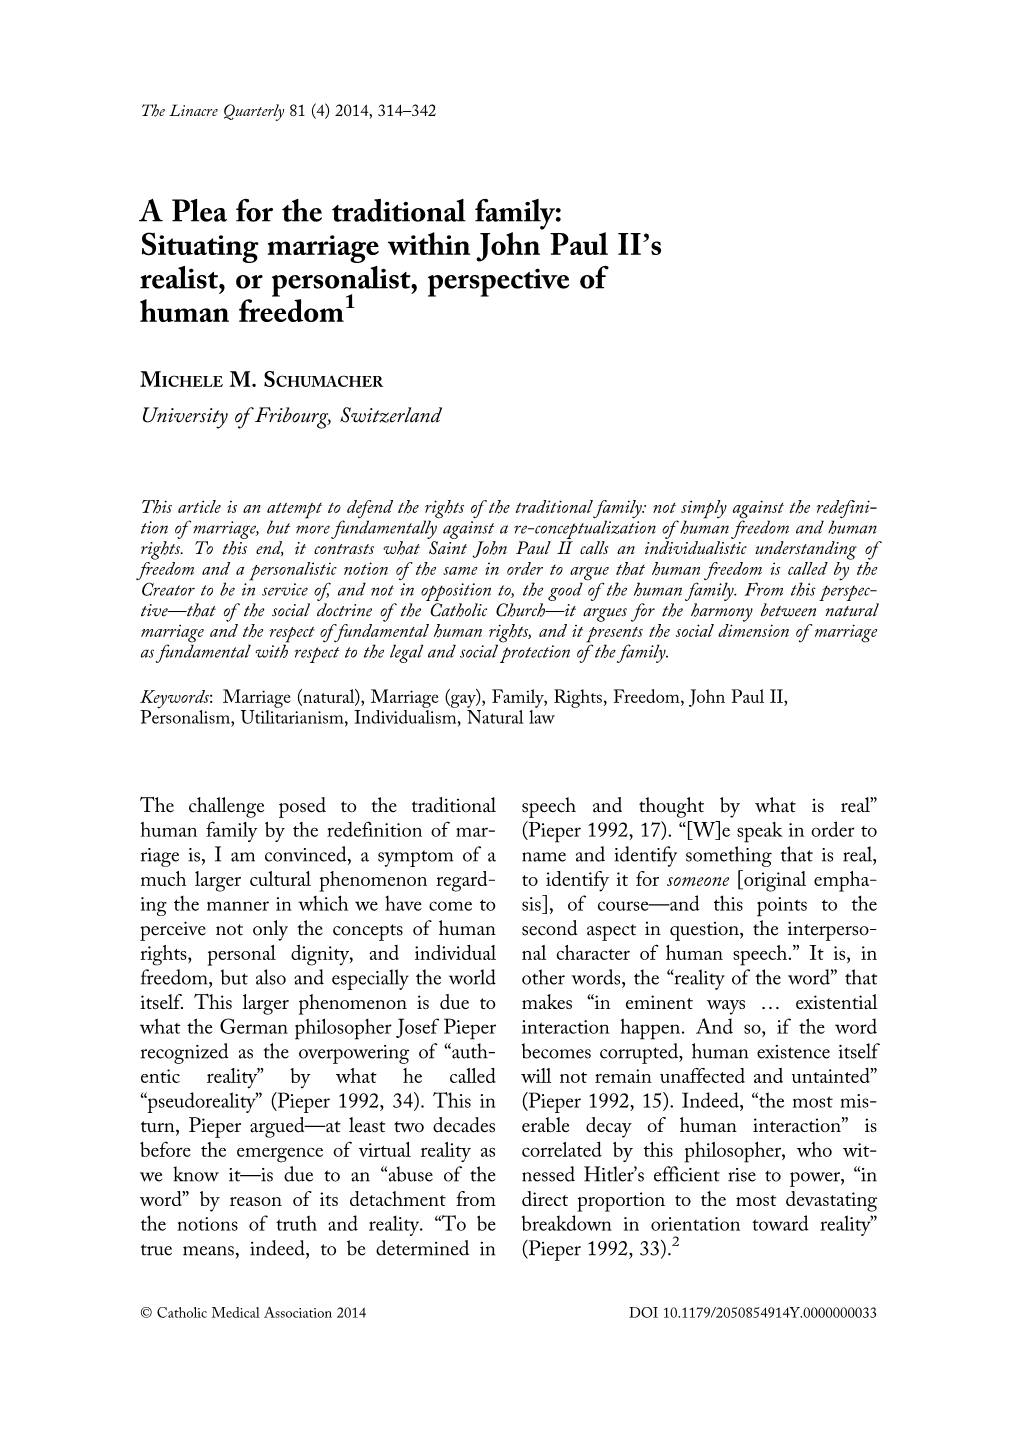 Situating Marriage Within John Paul II's Realist, Or Personalist